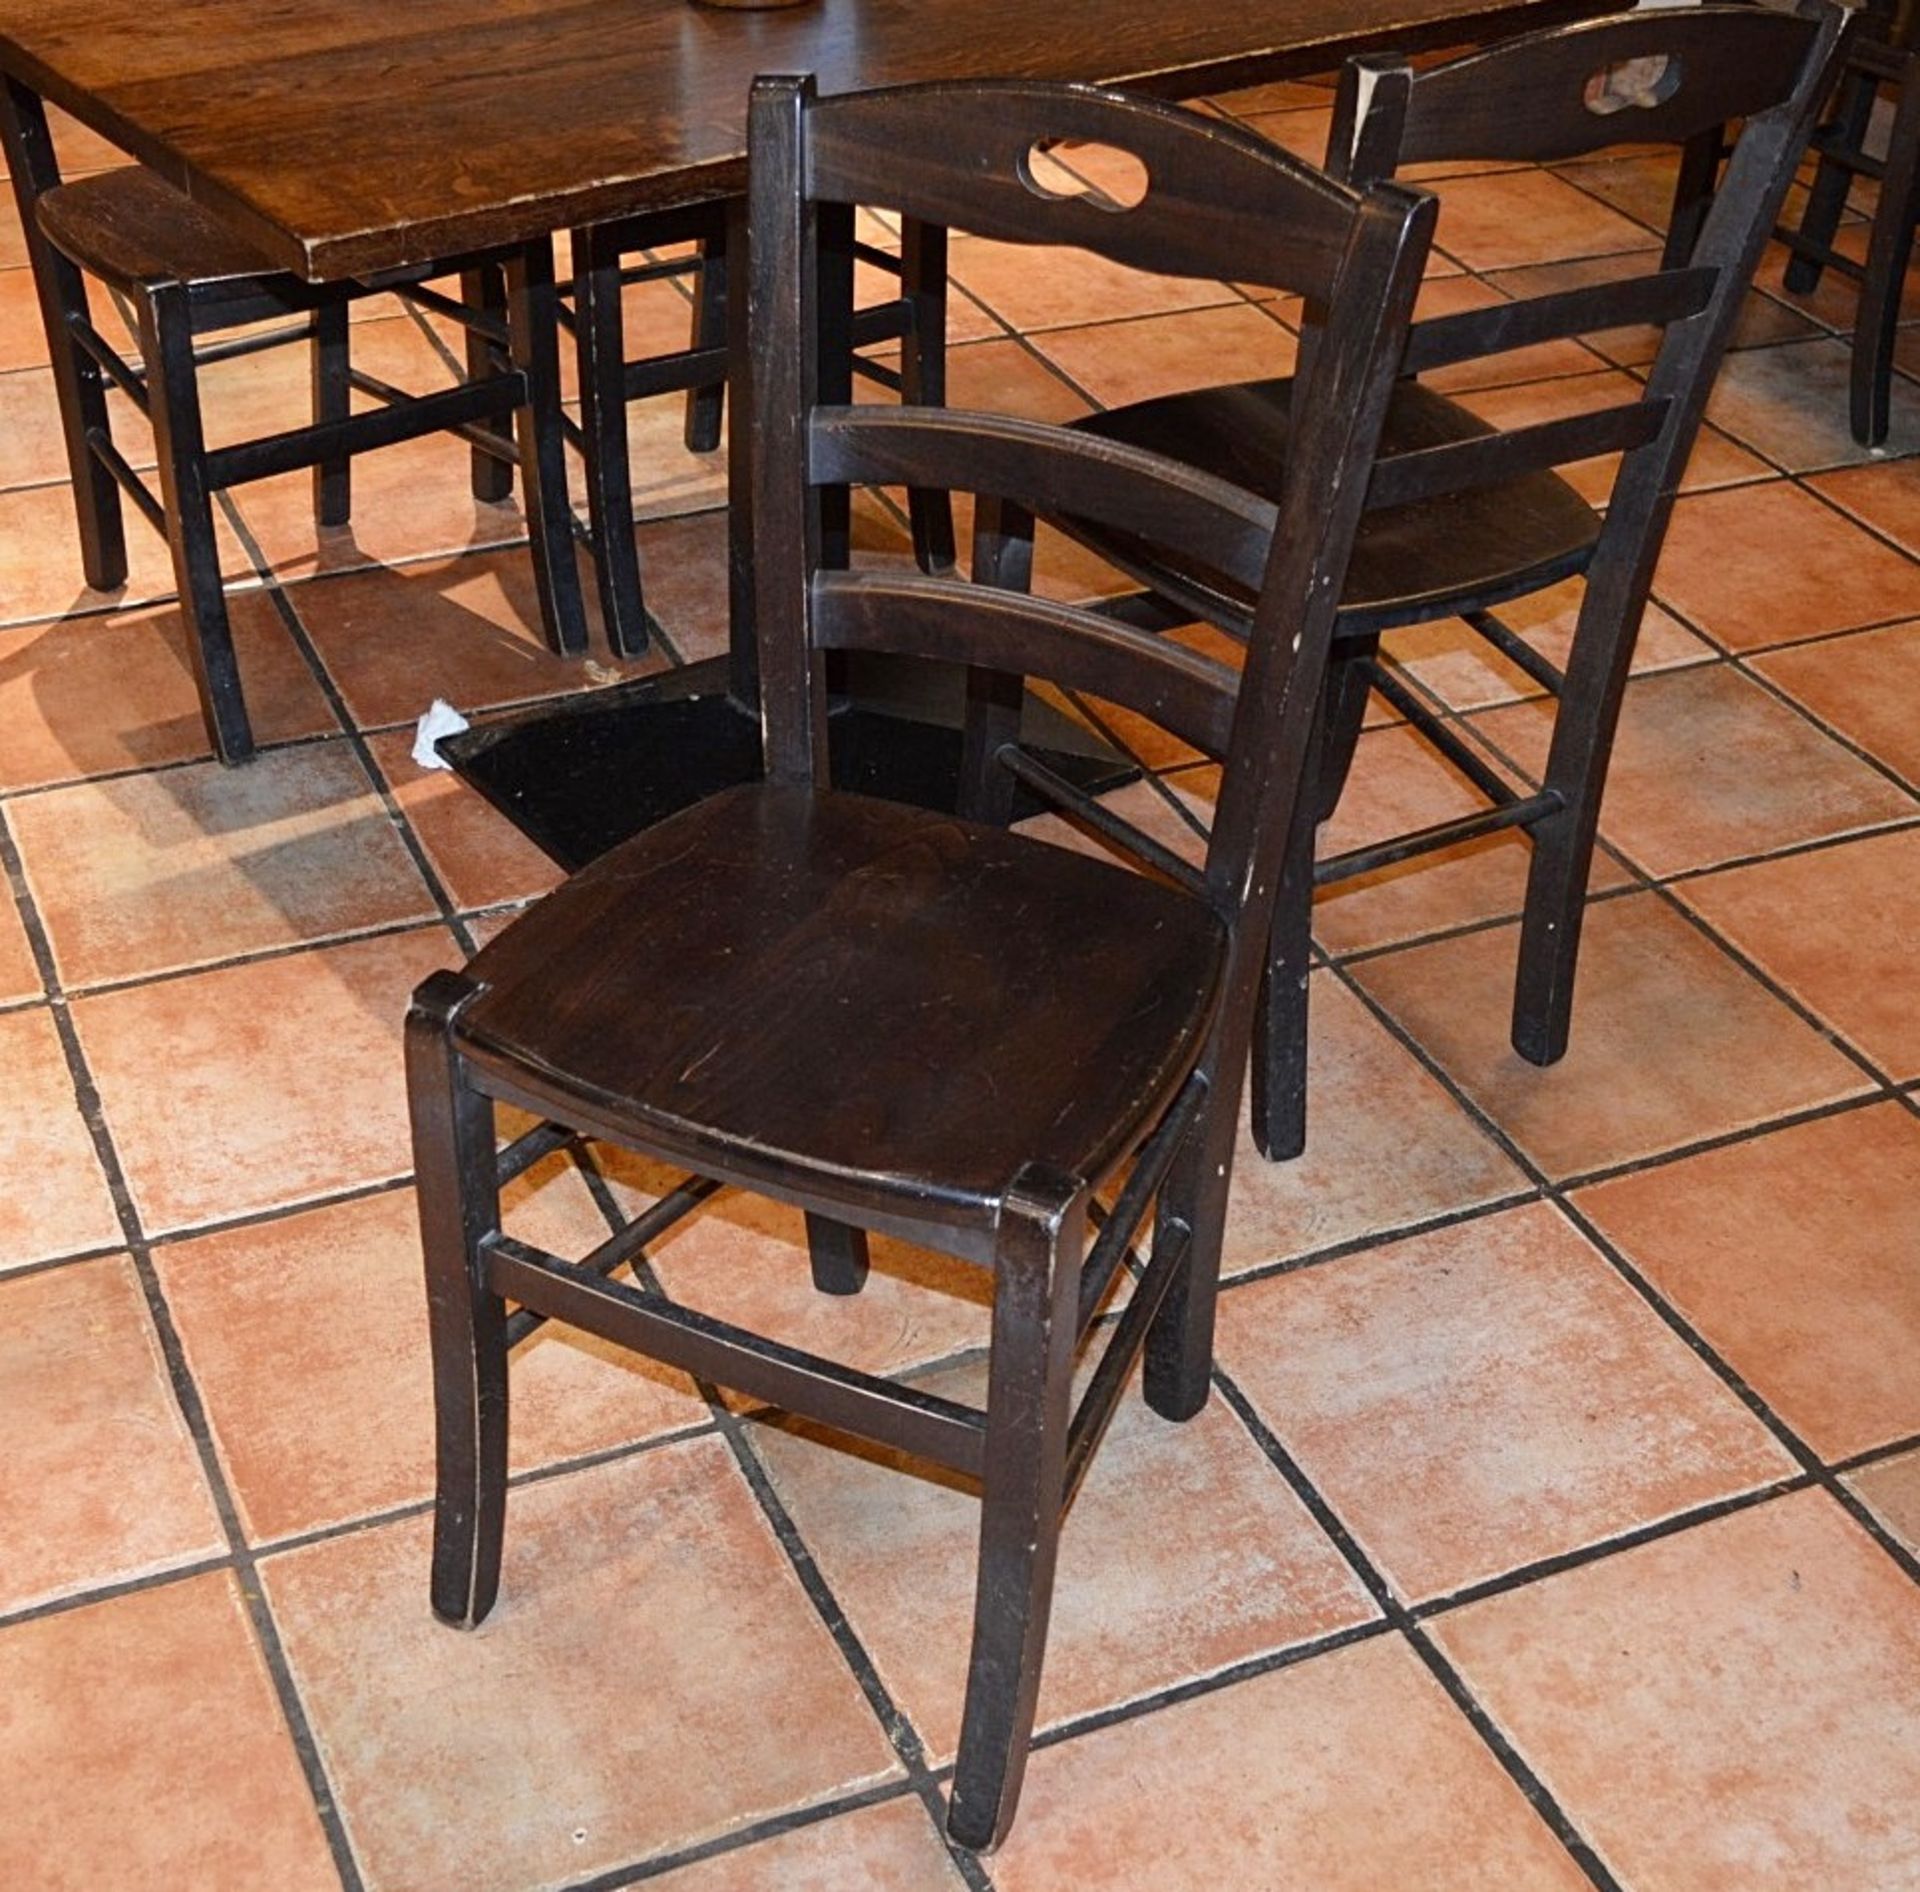 10 x Assorted Rustic Restaurant Dining Chairs - Taken From A Popular Eatery - Manchester M17